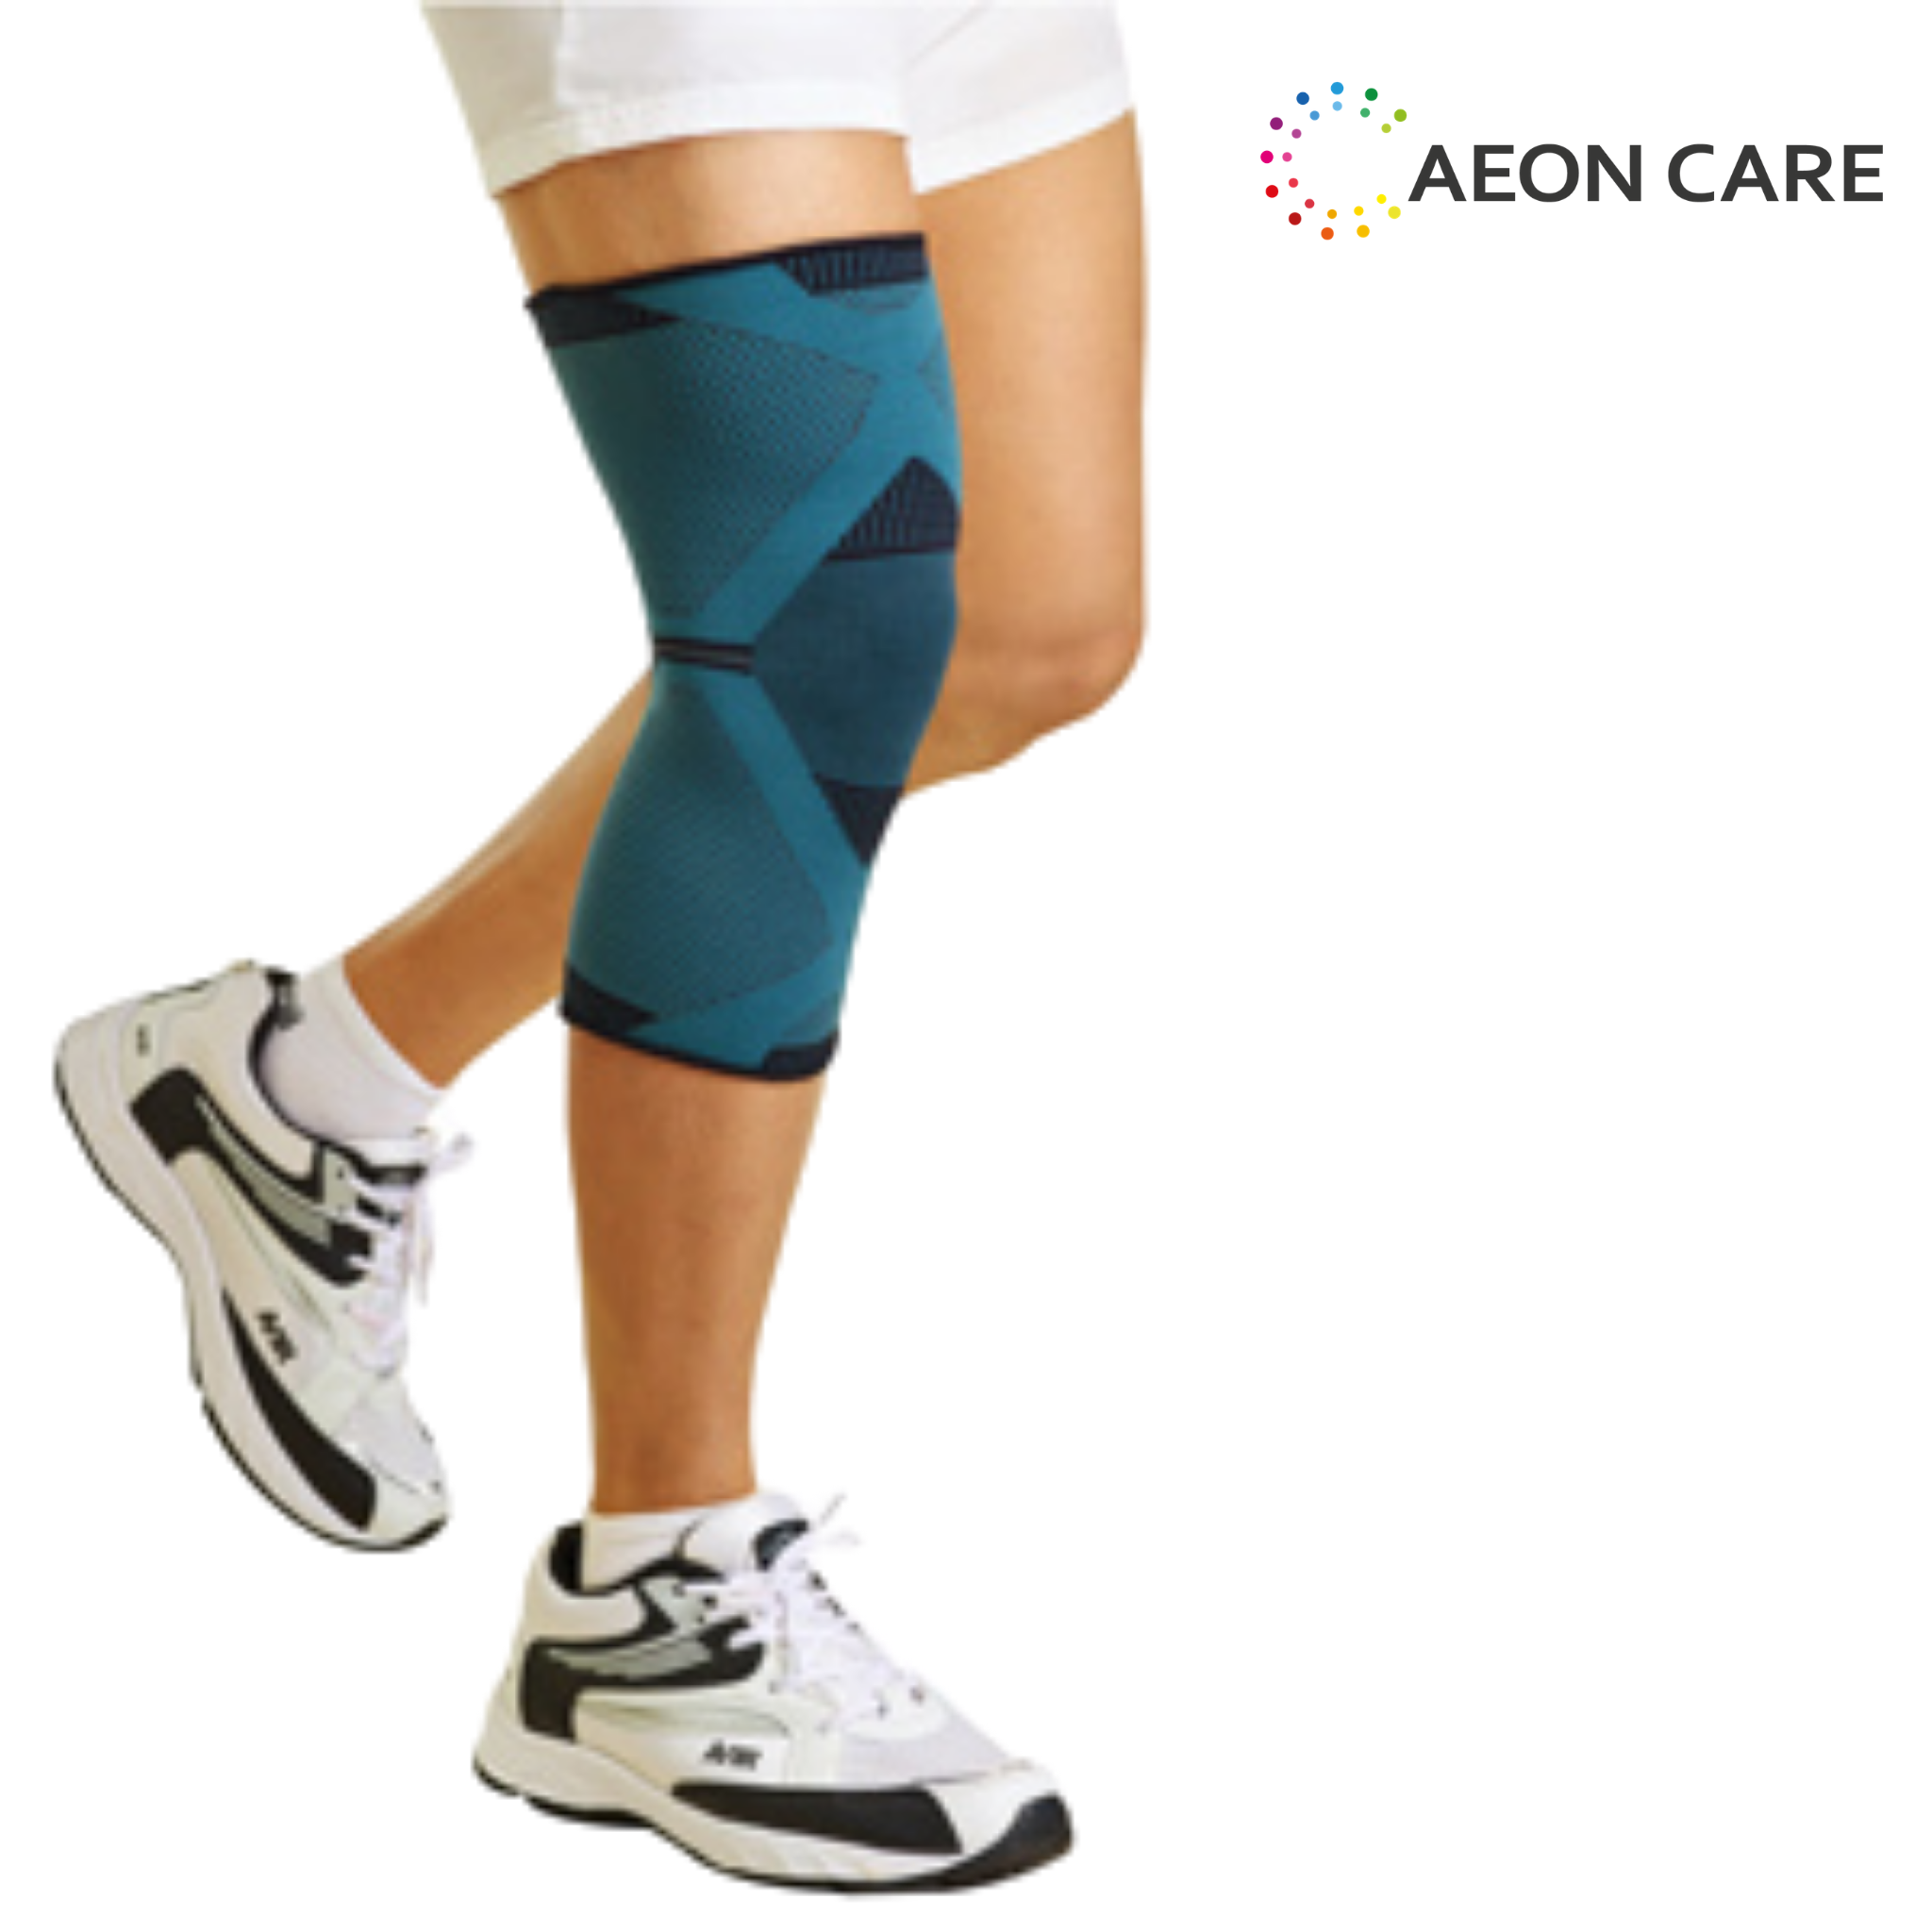 Regain your mobility and get back into your active life with knee cap. Check Out Now and Get 10% Discount on Premium Knee Cap.